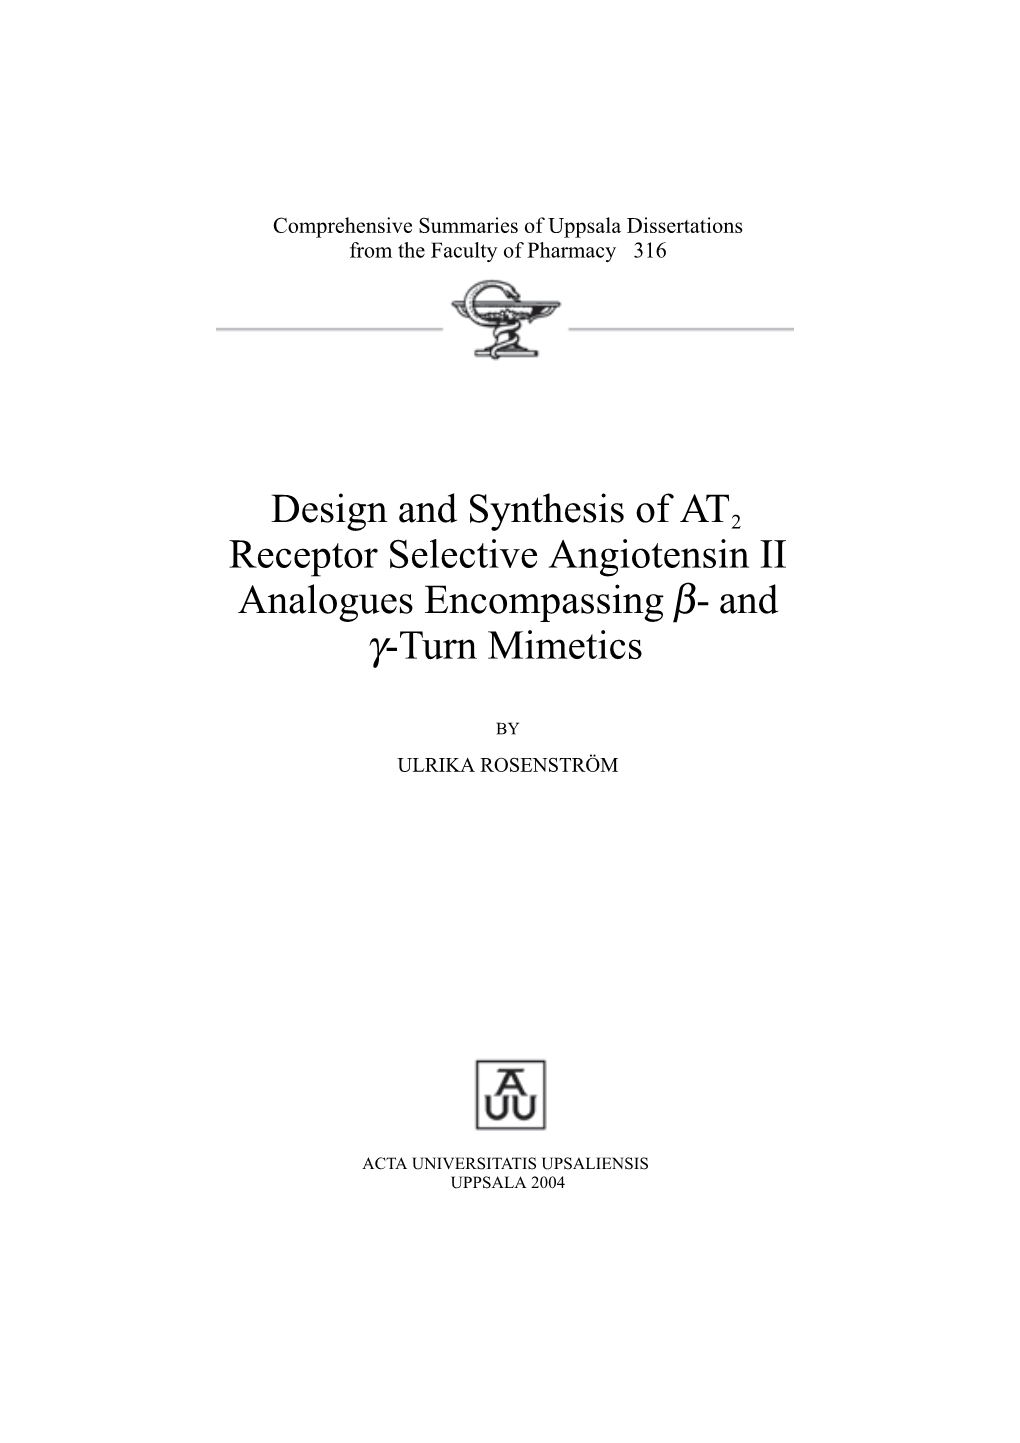 Design and Synthesis of AT2 Receptor Selective Angiotensin II